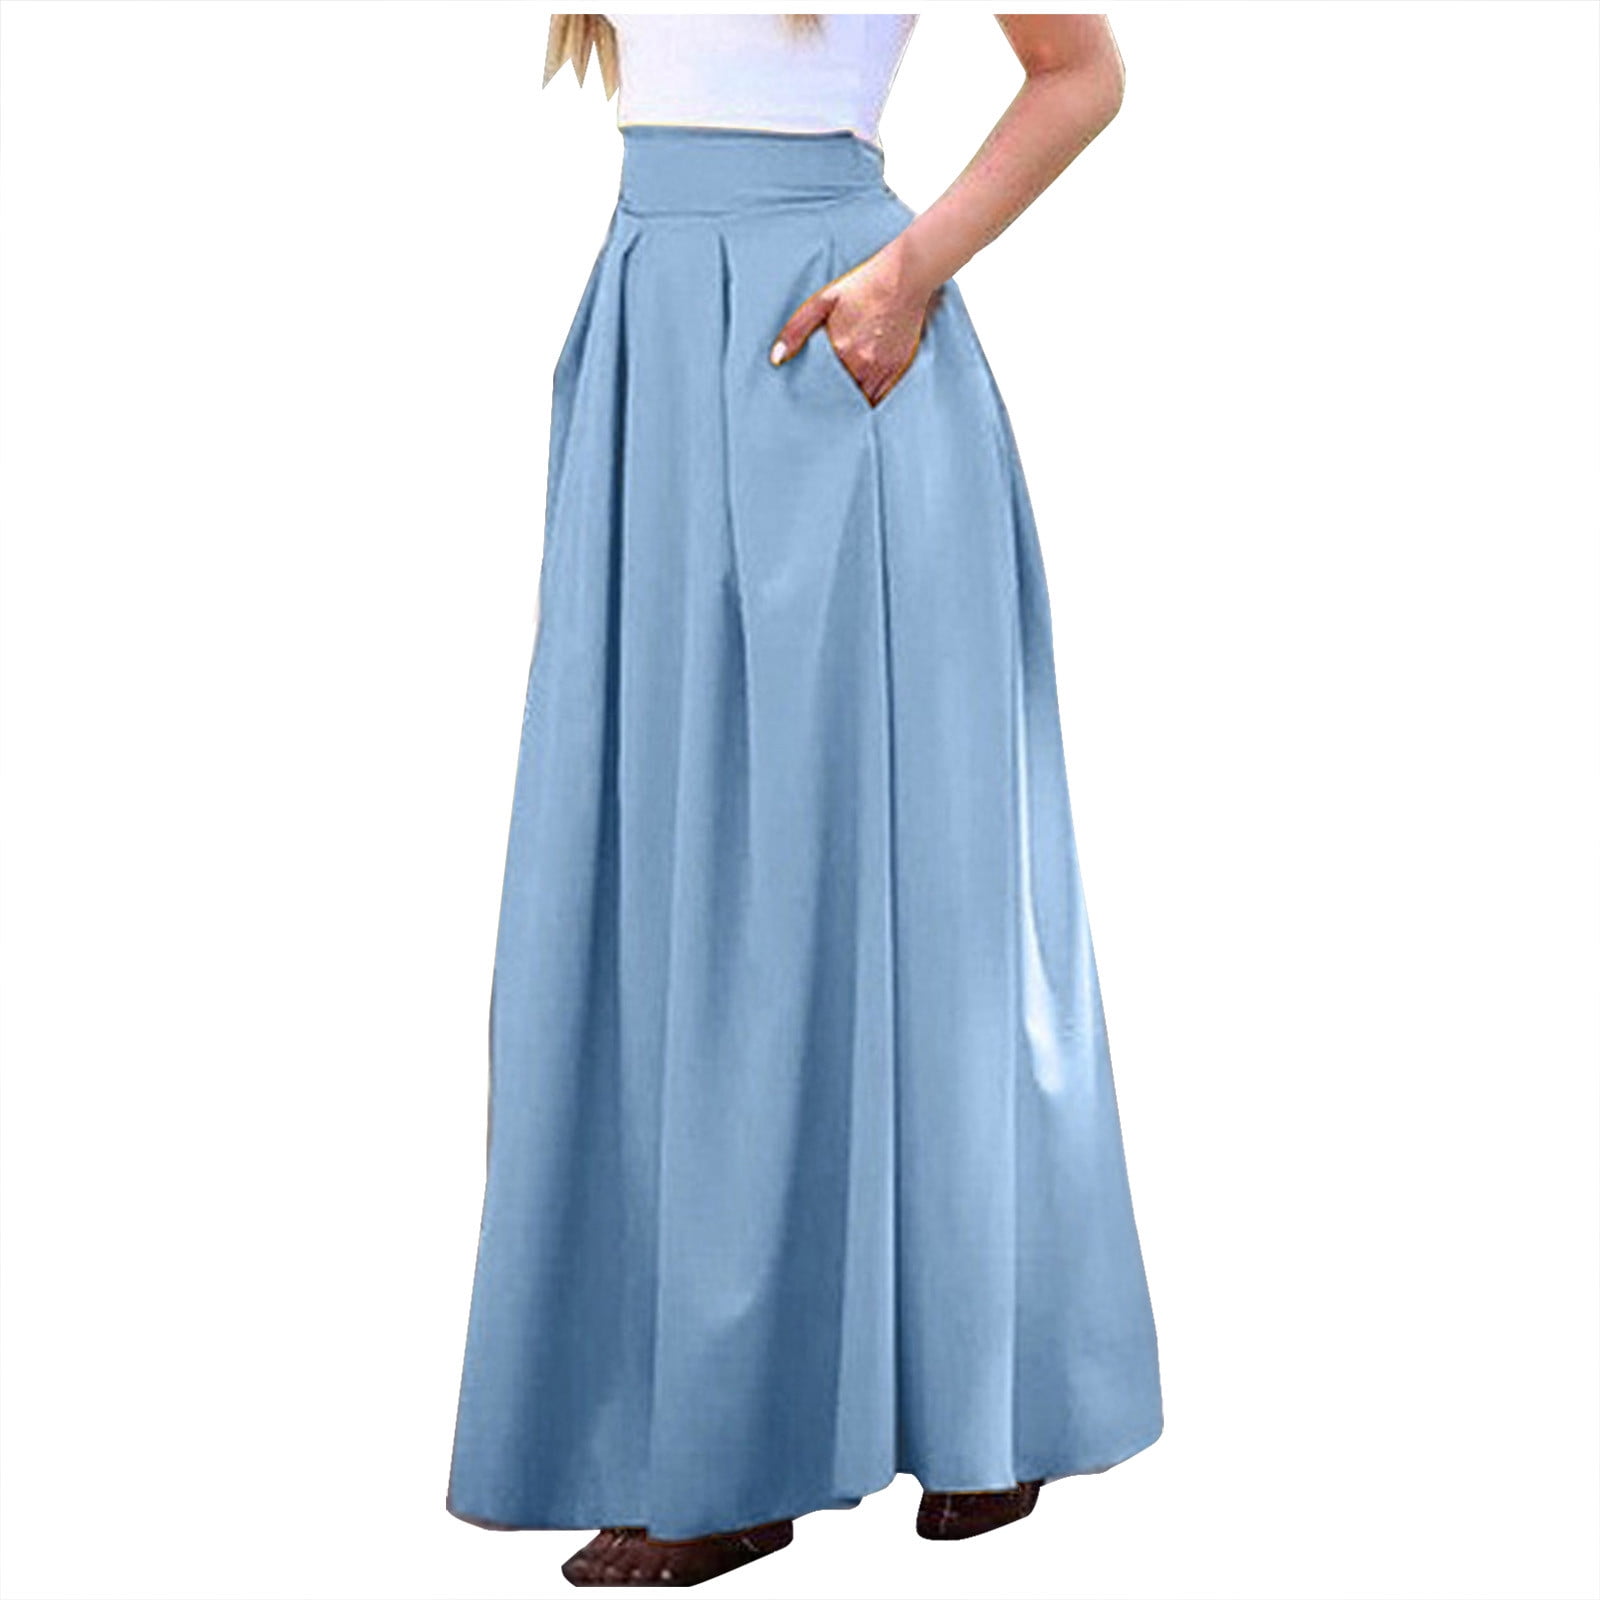 Summer Maxi Skirts for Women High Waisted Loose Swing Full Length Dressy Casual Pleated Long Skirt with Pockets b3c0dc8e d714 439f a7d3 1b95e74ba70f.017b407a45db1af35d0546bd6cc3028a